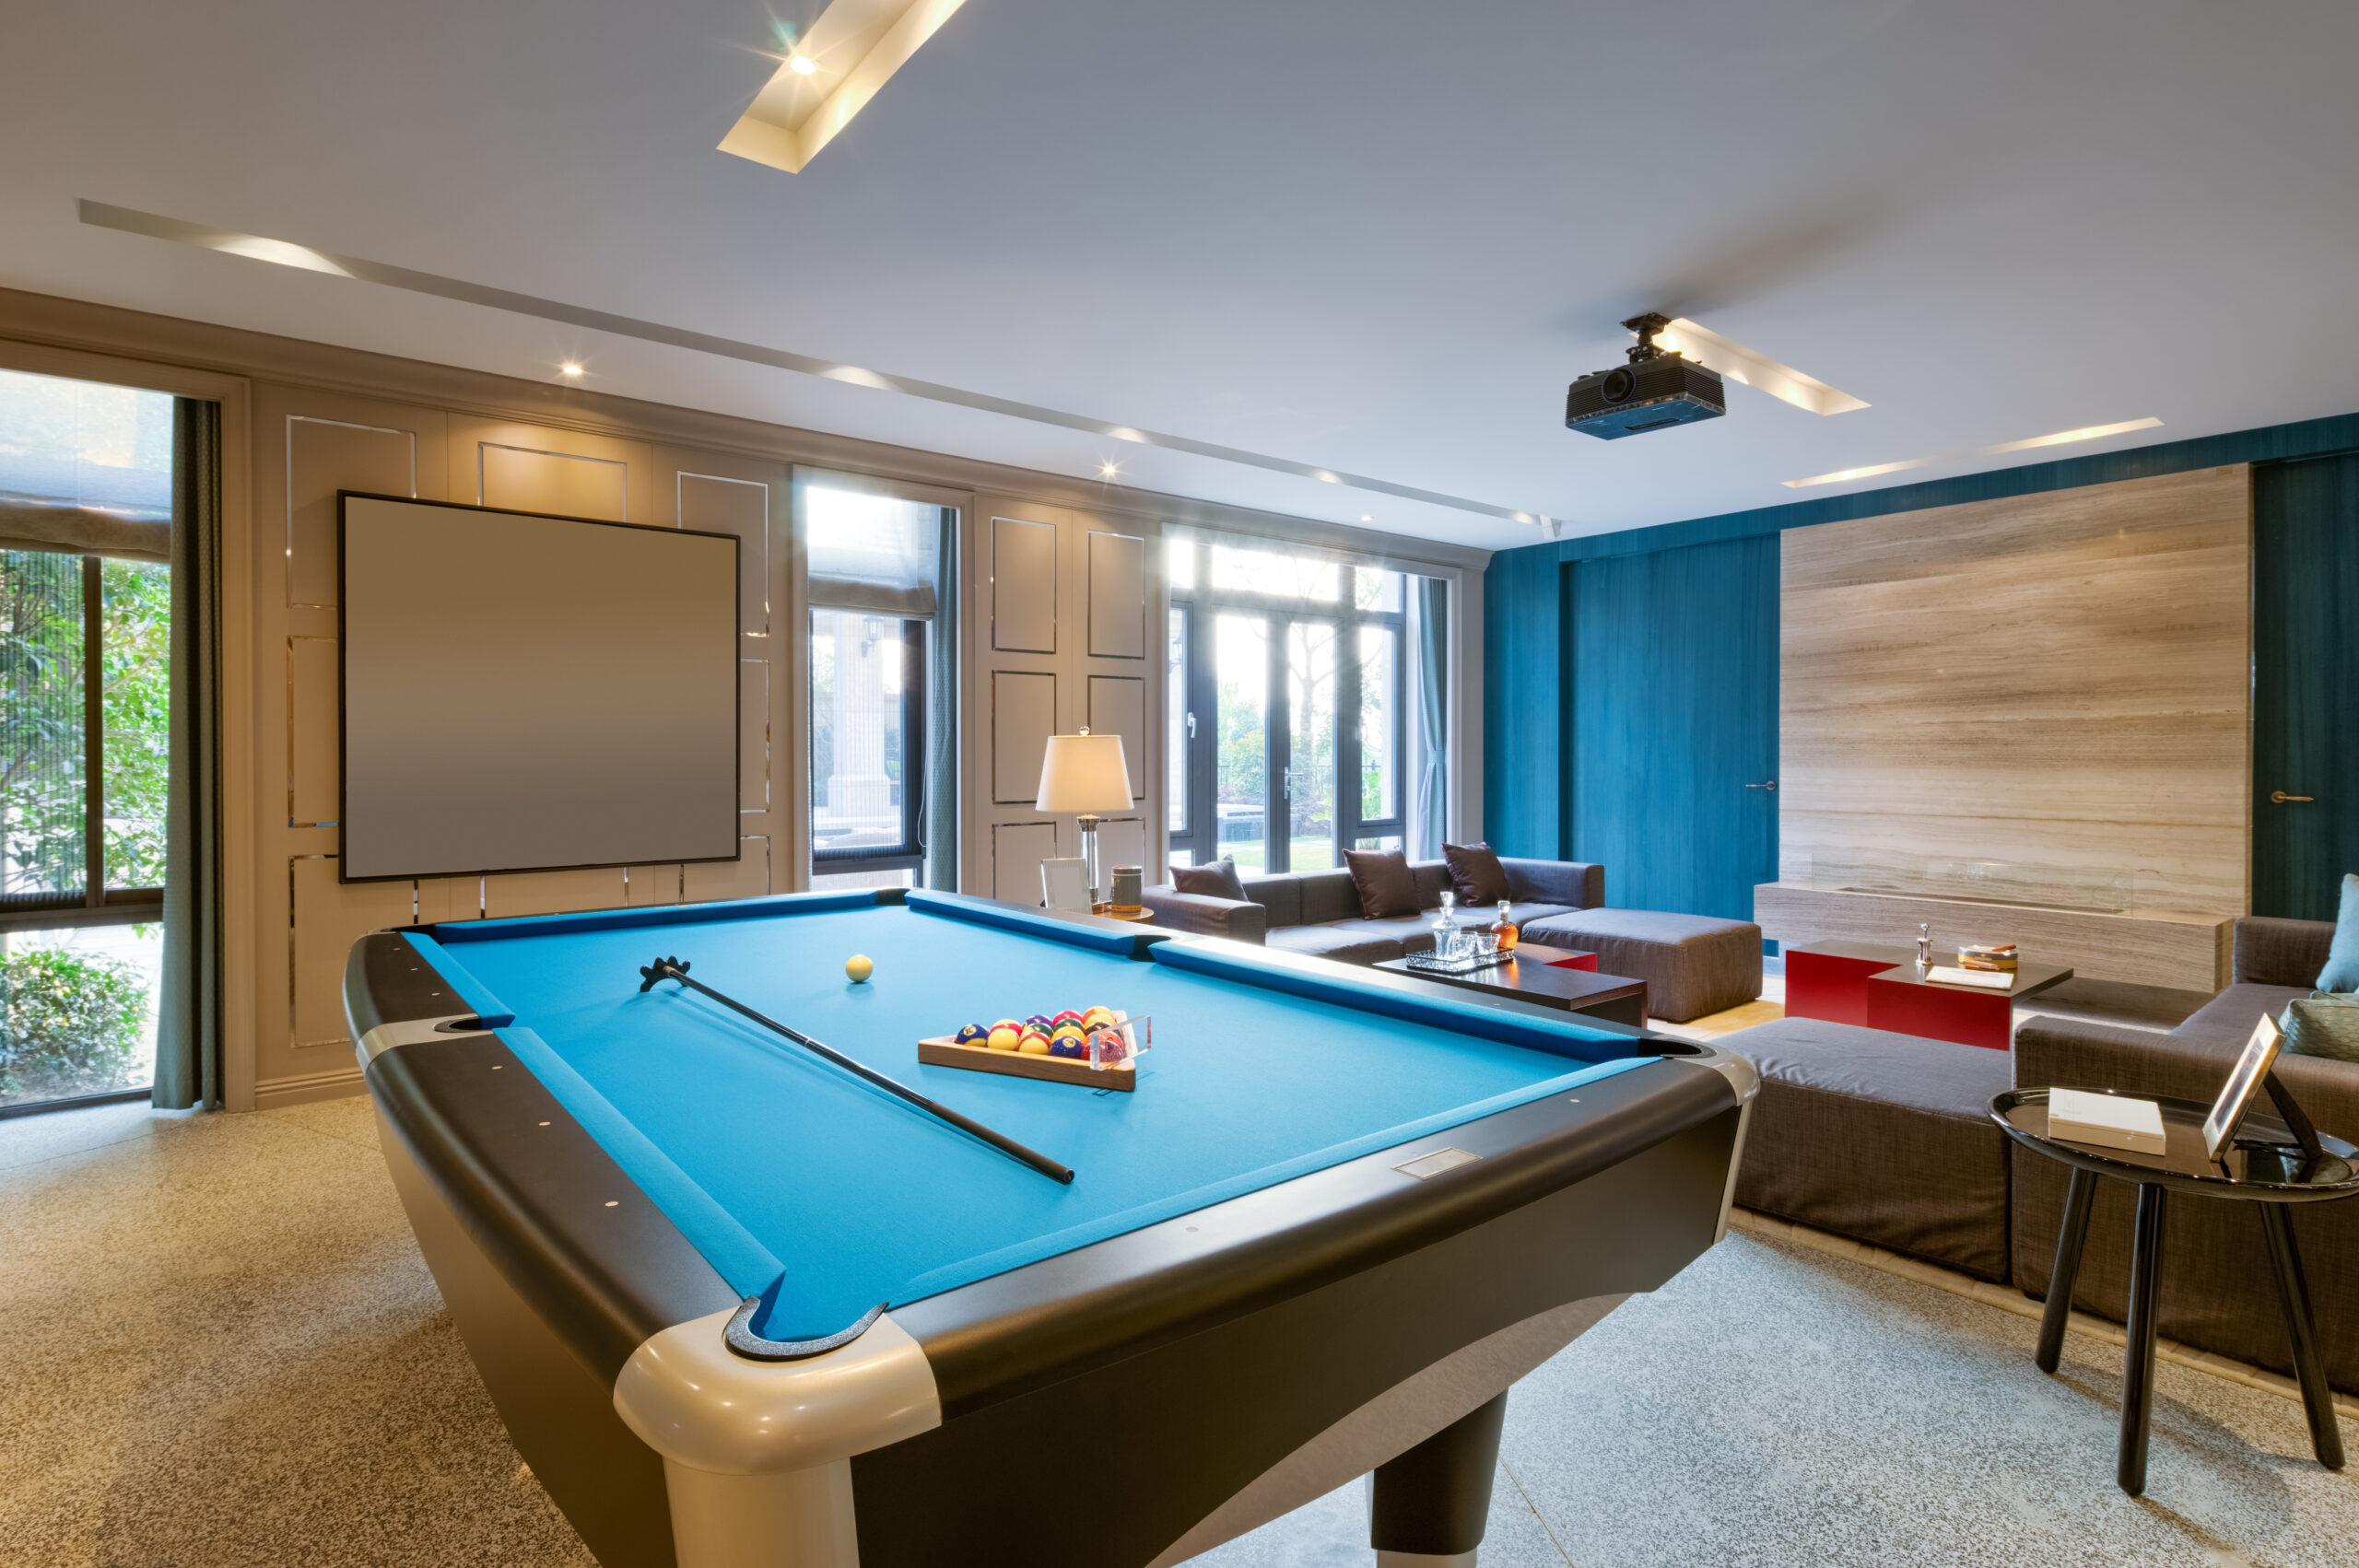 5 Tips for a Fabulous Game Room